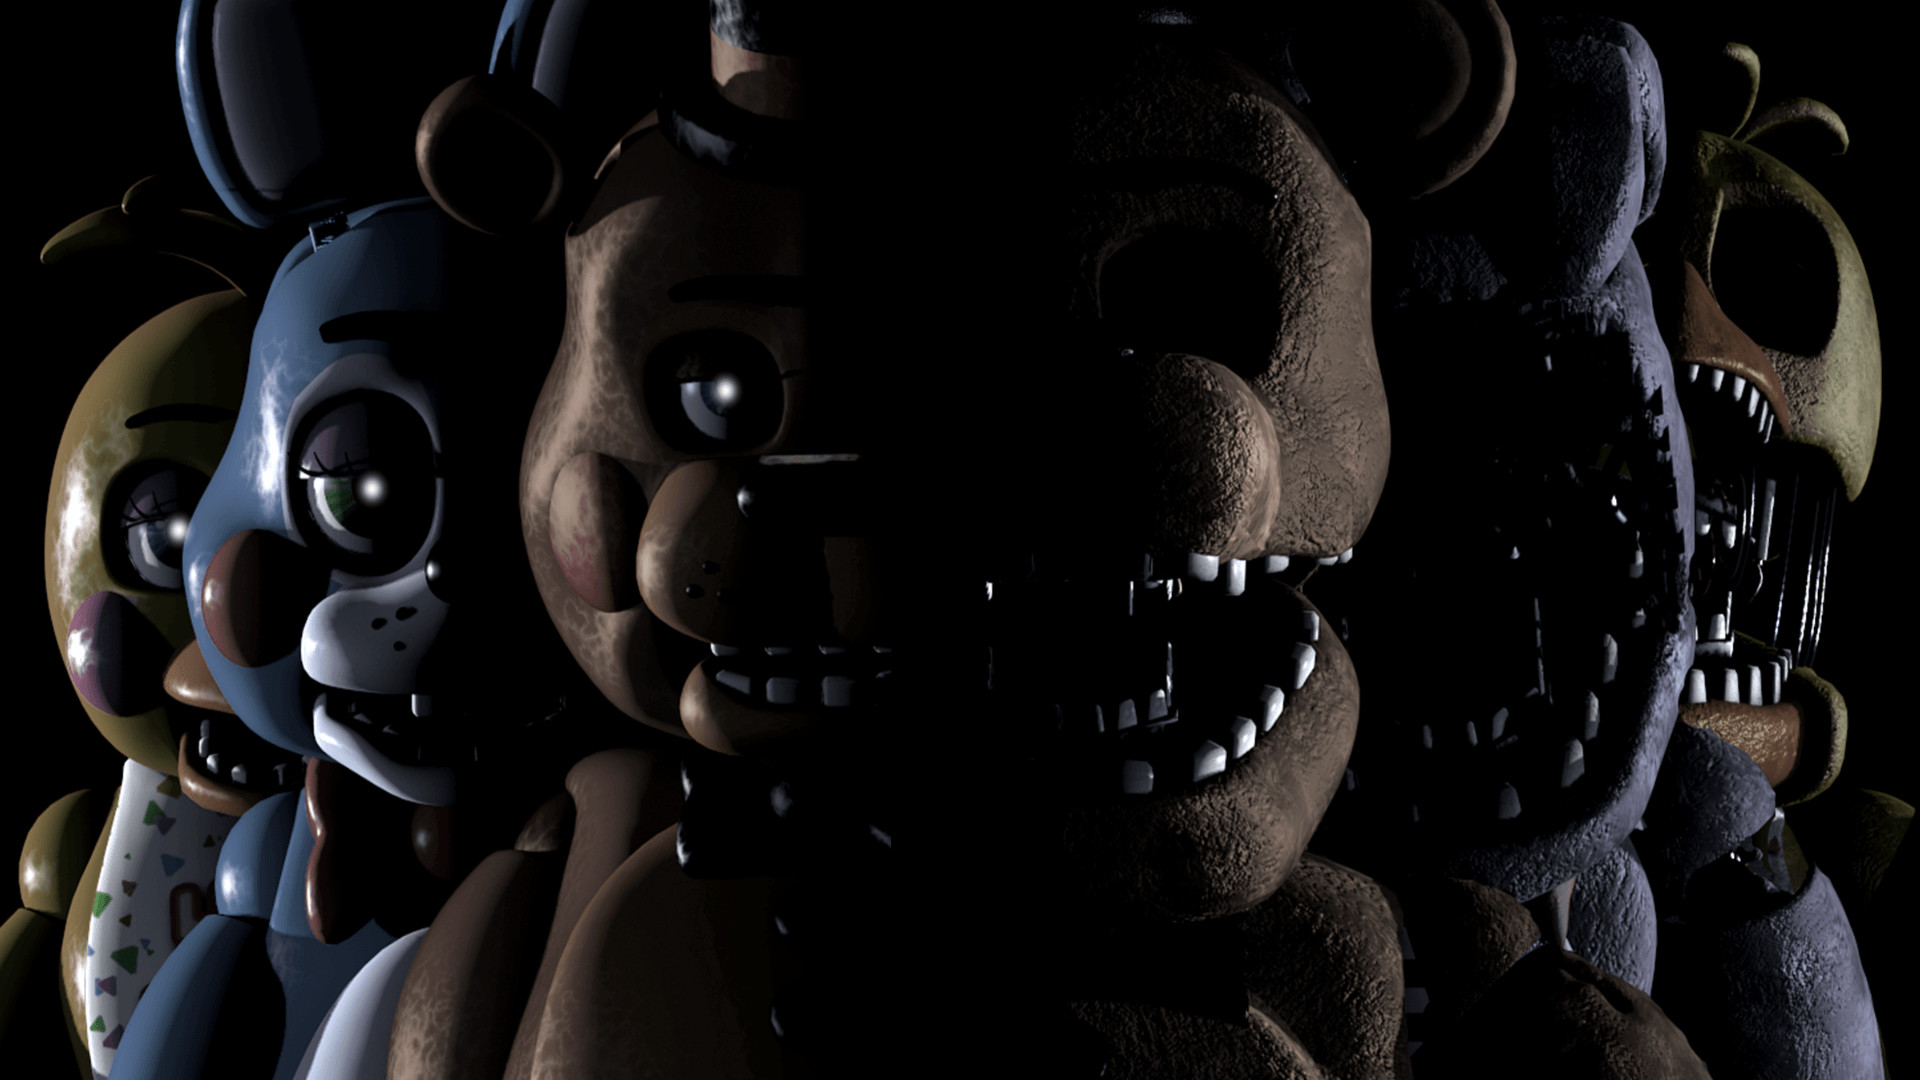 Download Five Nights At Freddy's 4 wallpapers for mobile phone